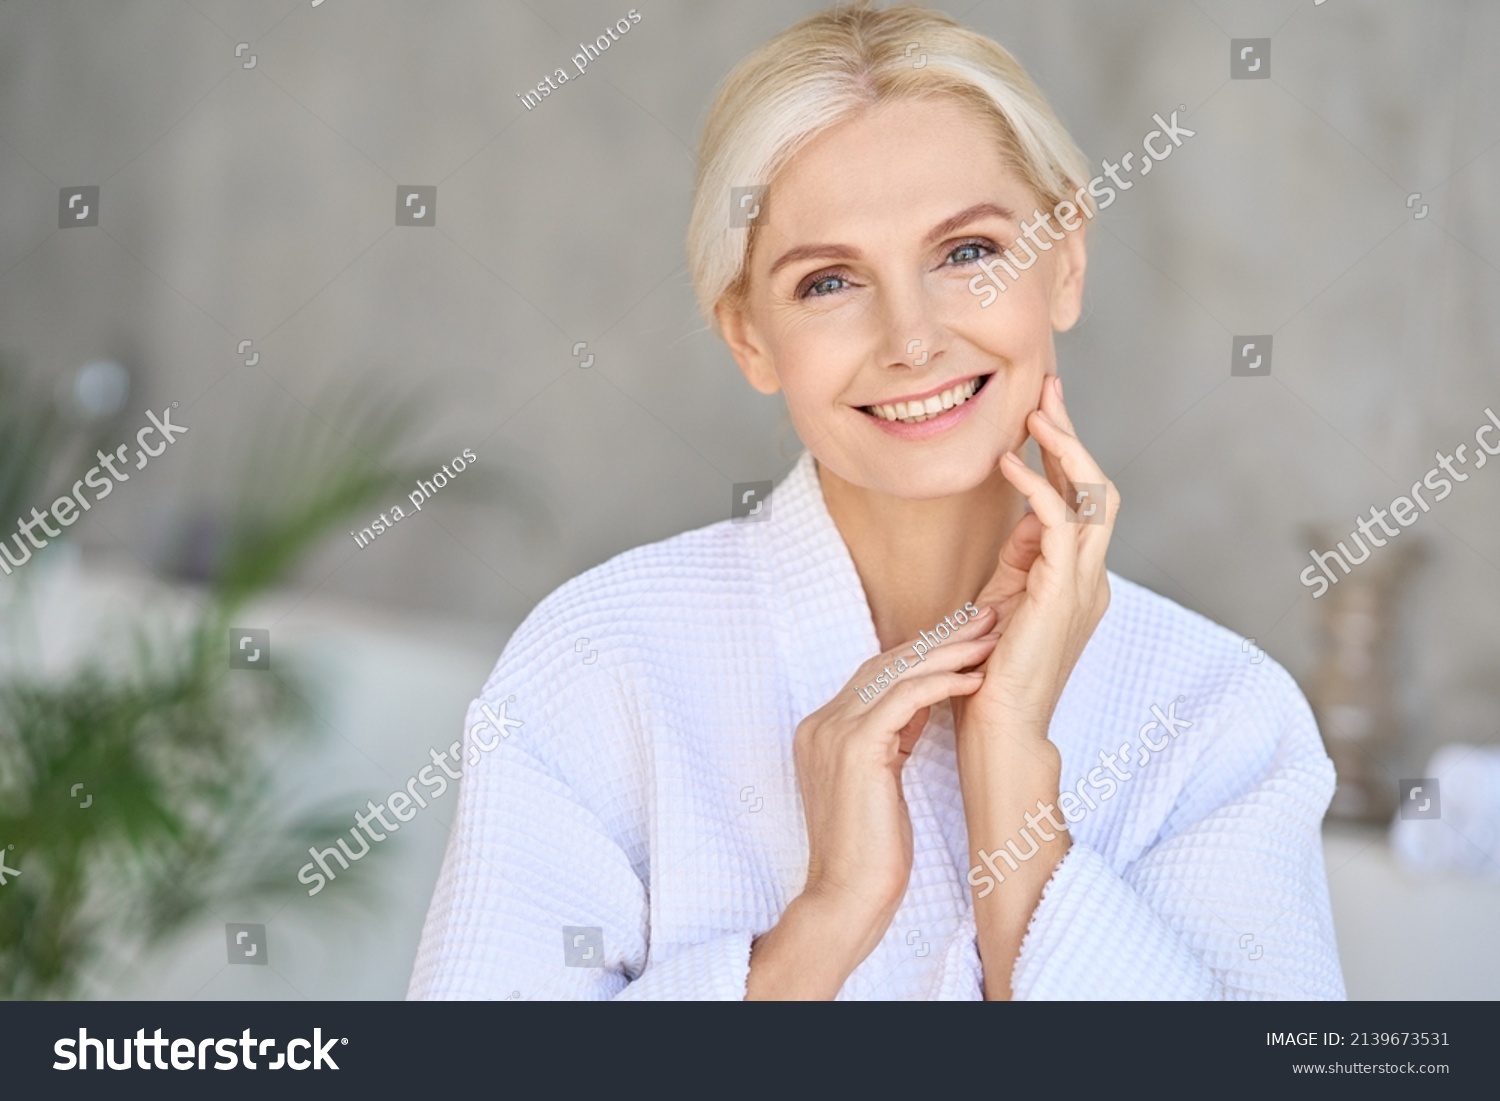 Headshot of happy smiling beautiful middle aged woman wearing bathrobe at spa salon hotel looking at camera touching face. Wellness spa procedures advertising. Skincare concept. #2139673531